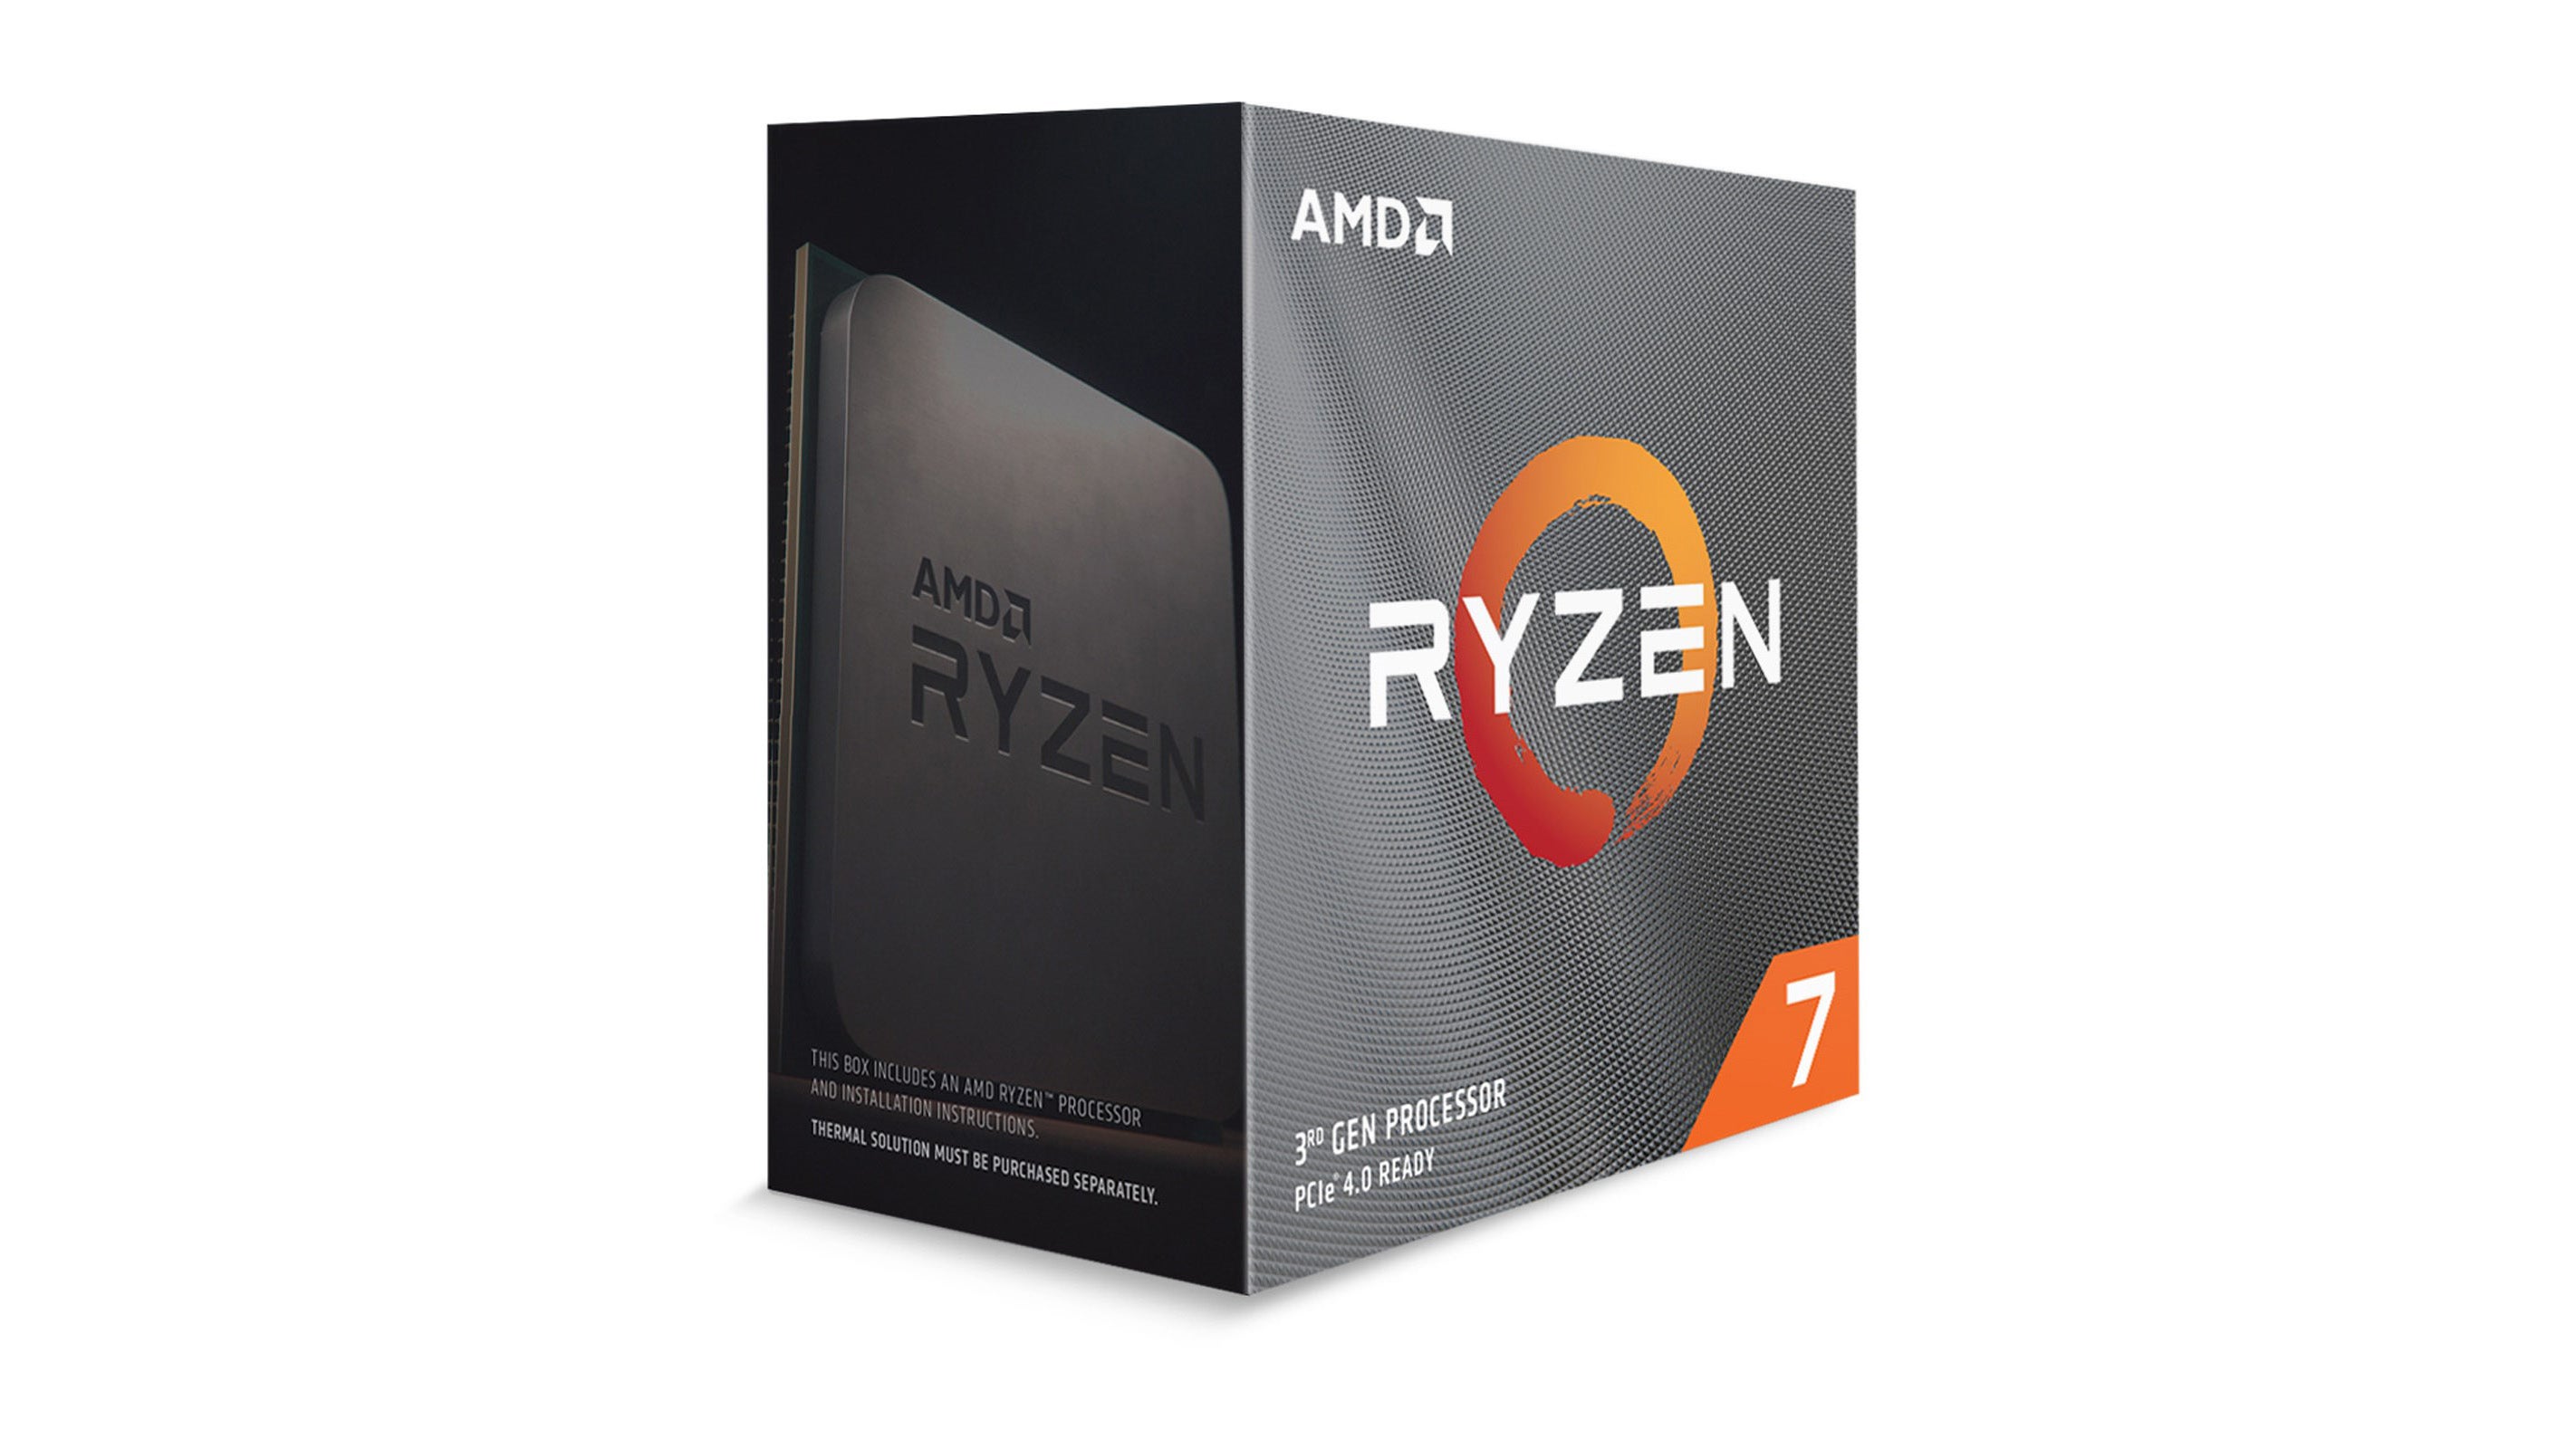 AMD's Ryzen 7 5700X is down to £185 at Amazon UK - a great CPU ...